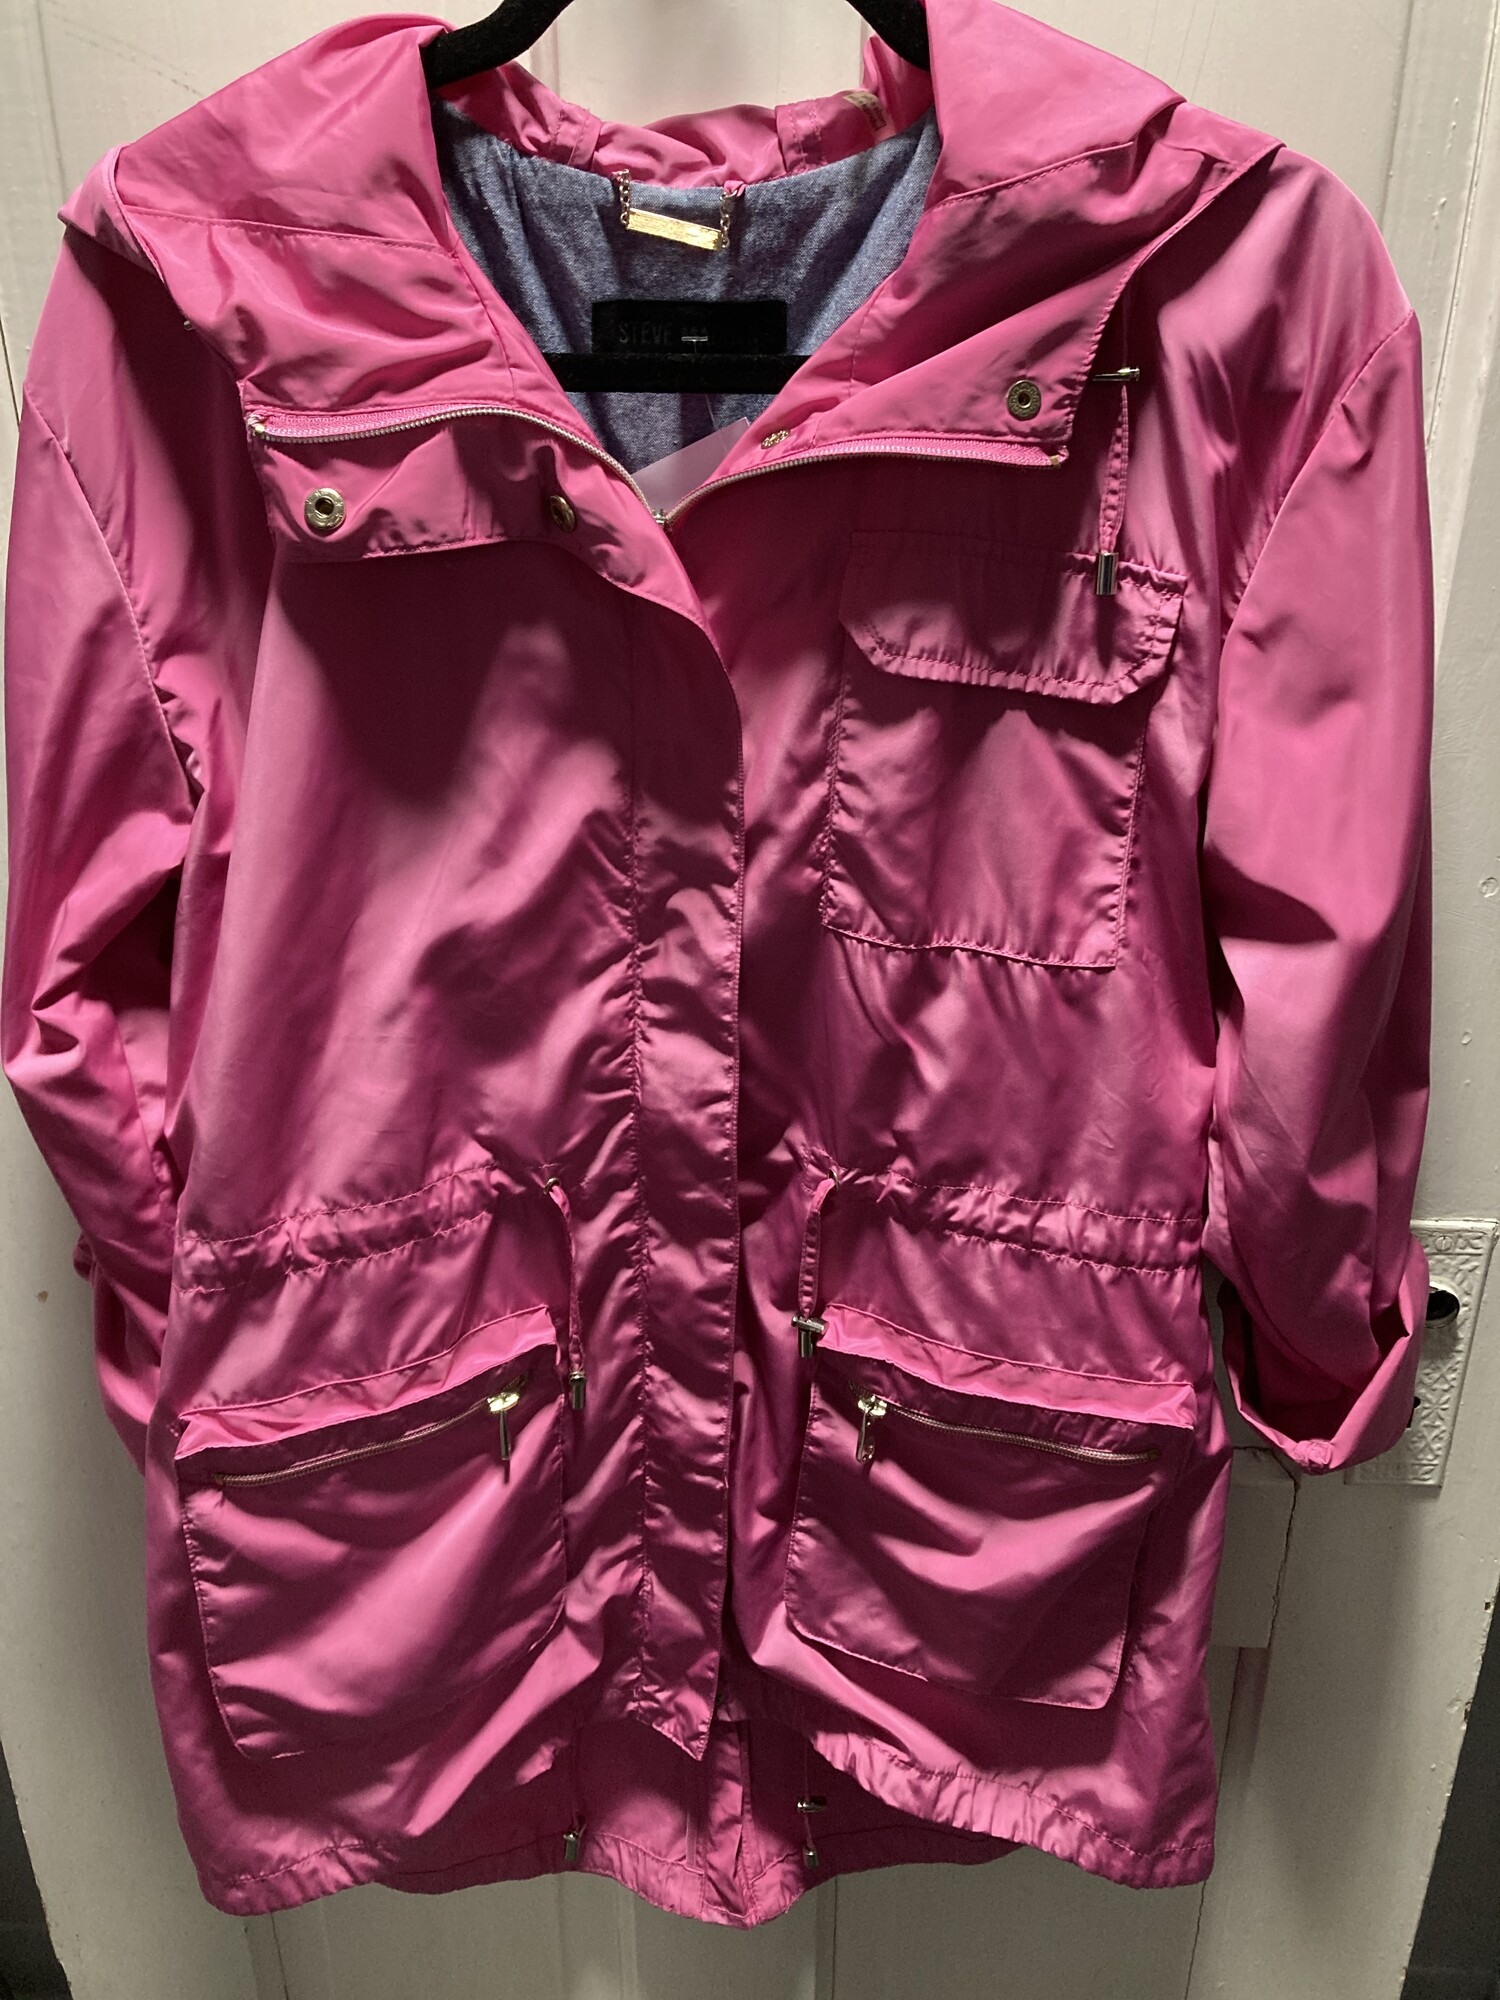 Steve Madden spring coat, Zip front, Hood, Pink,silver  hardware, adjustable waist Size: Small
Way cute!!!